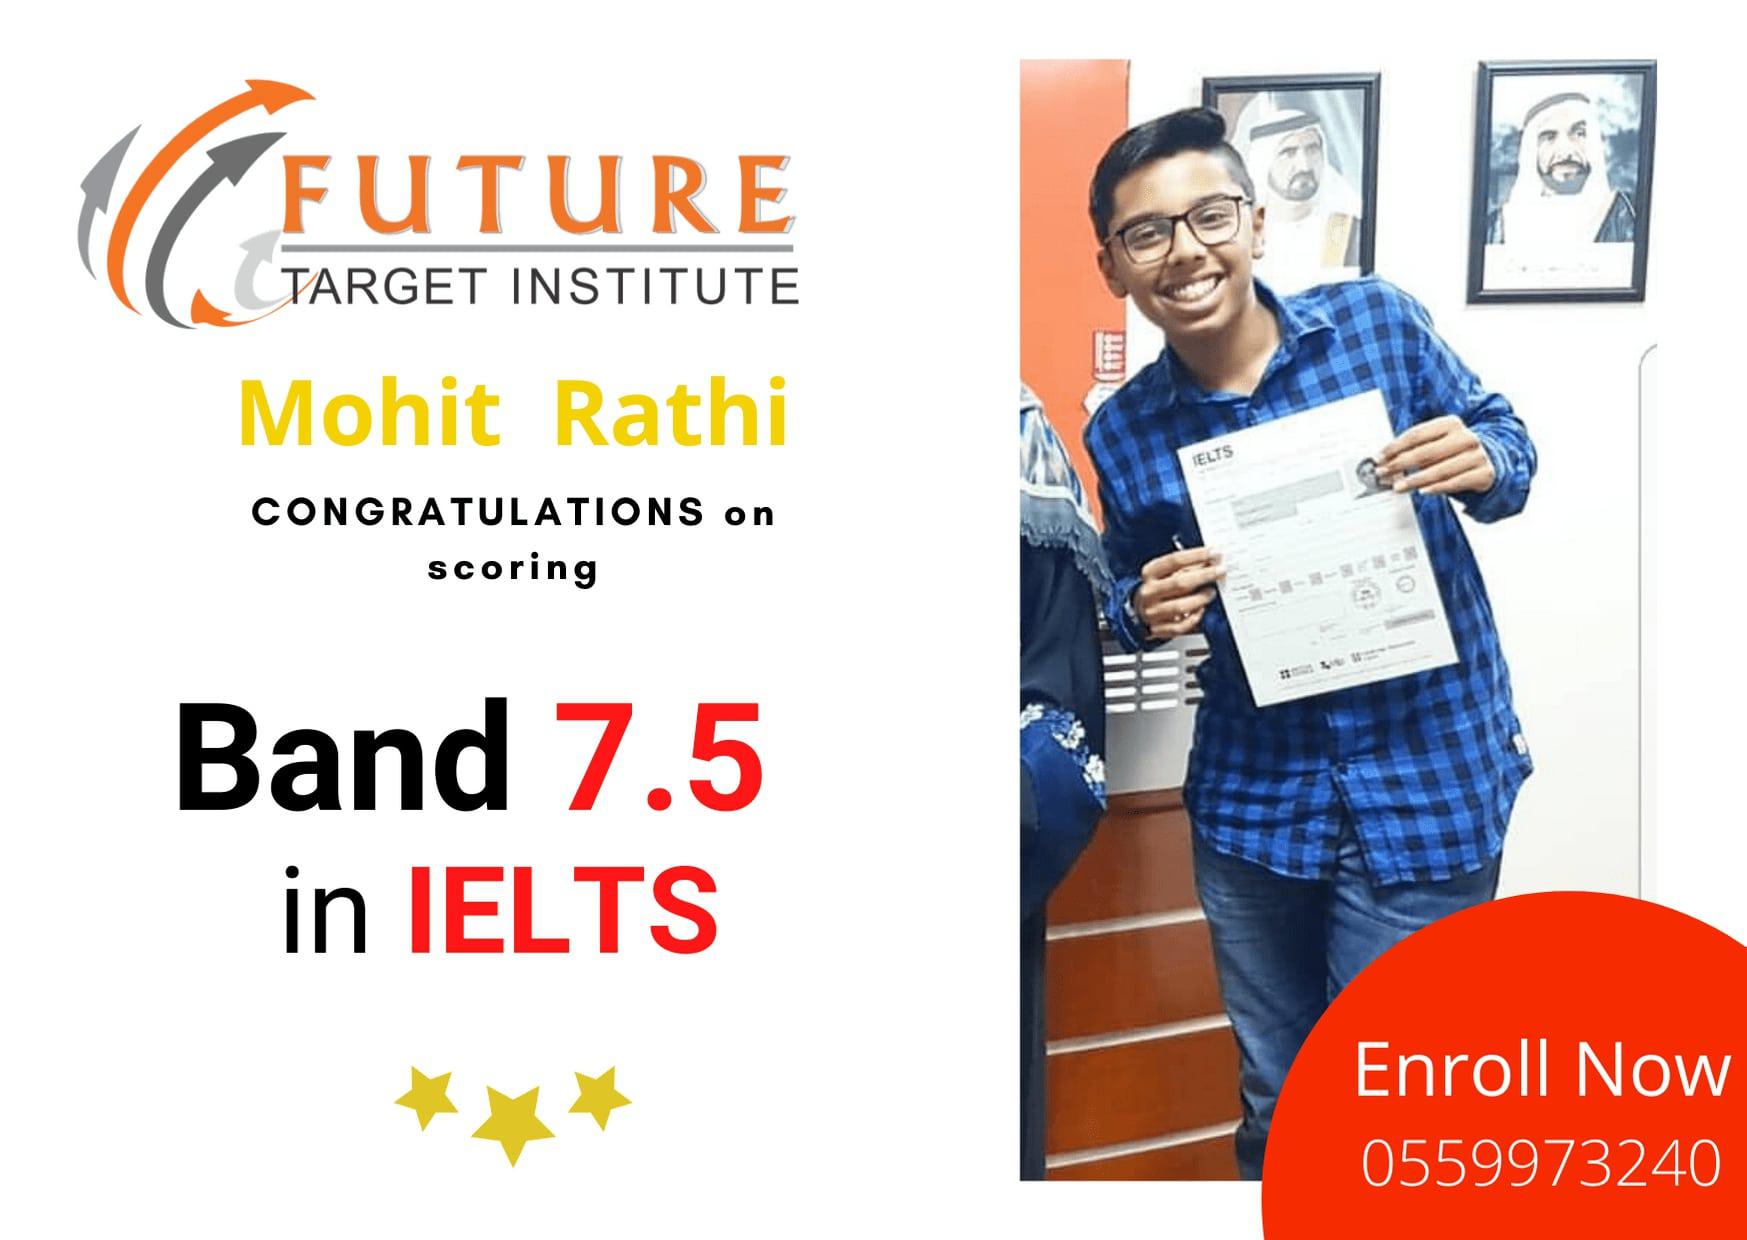 Ms Marwa Umar's success story who improved her IELTS Listening Score through several practice tests and classes at Future Target Institute.